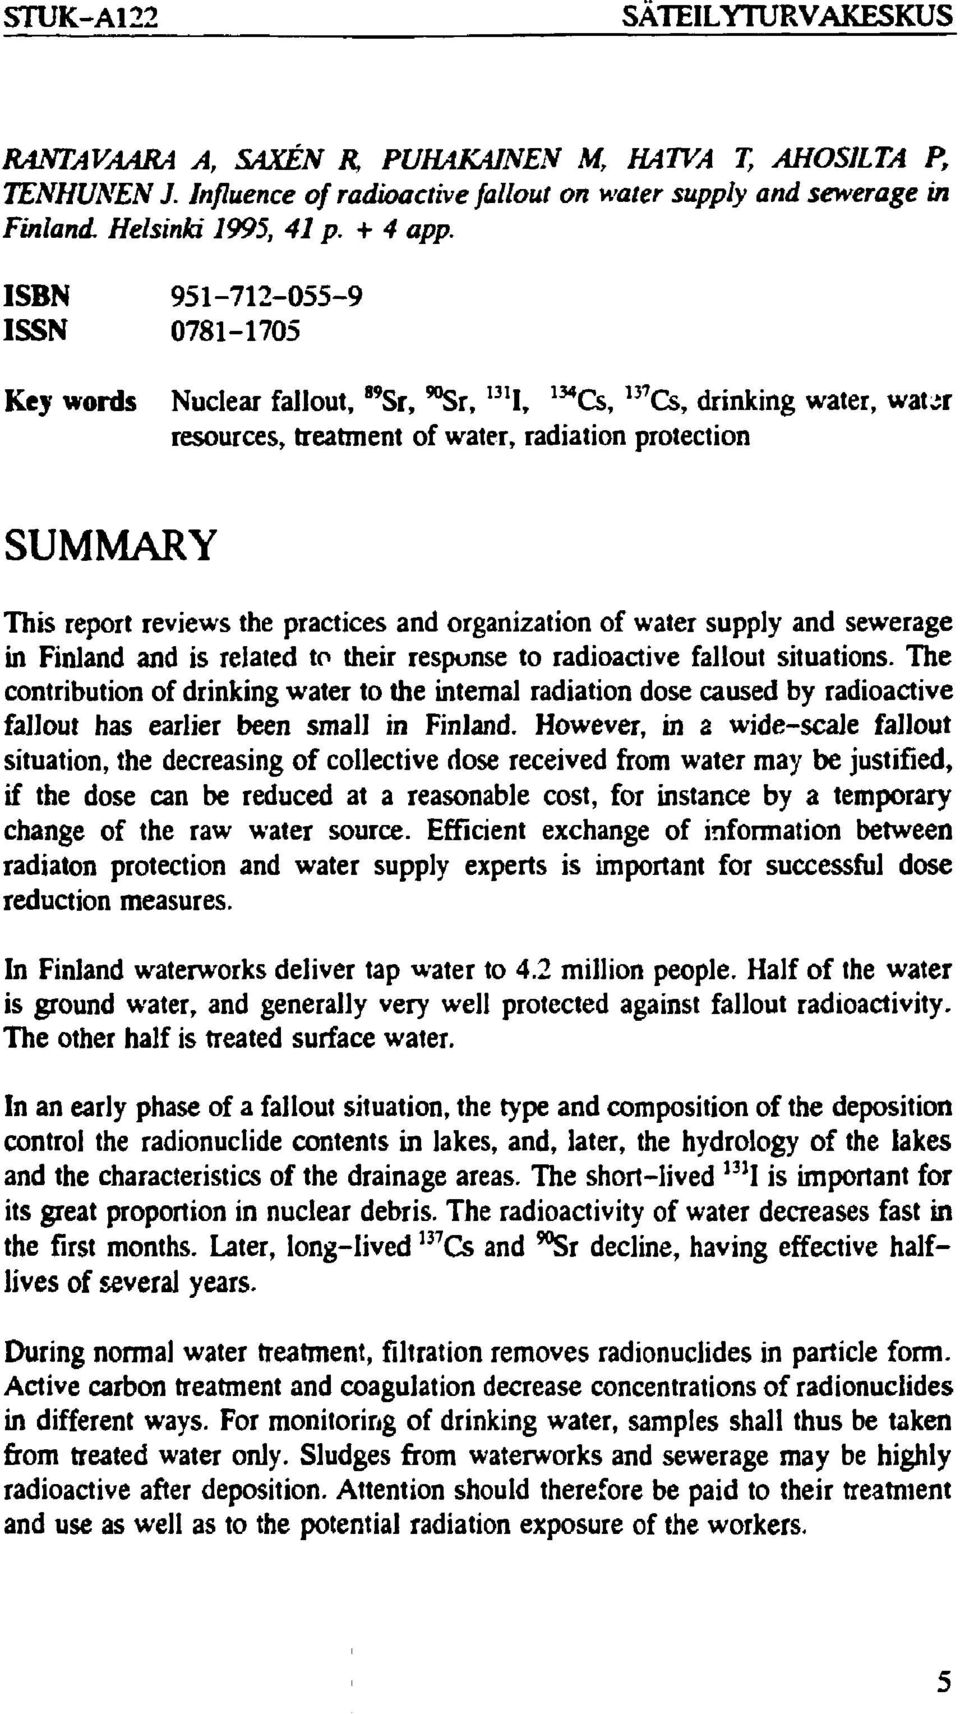 ISBN 951-712-055-9 ISSN 0781-1705 Key words Nuclear fallout, 89 Sr, ^Sr, 13, I, 134 Cs, 1J7 Cs, drinking water, wat^r resources, treatment of water, radiation protection SUMMARY This report reviews